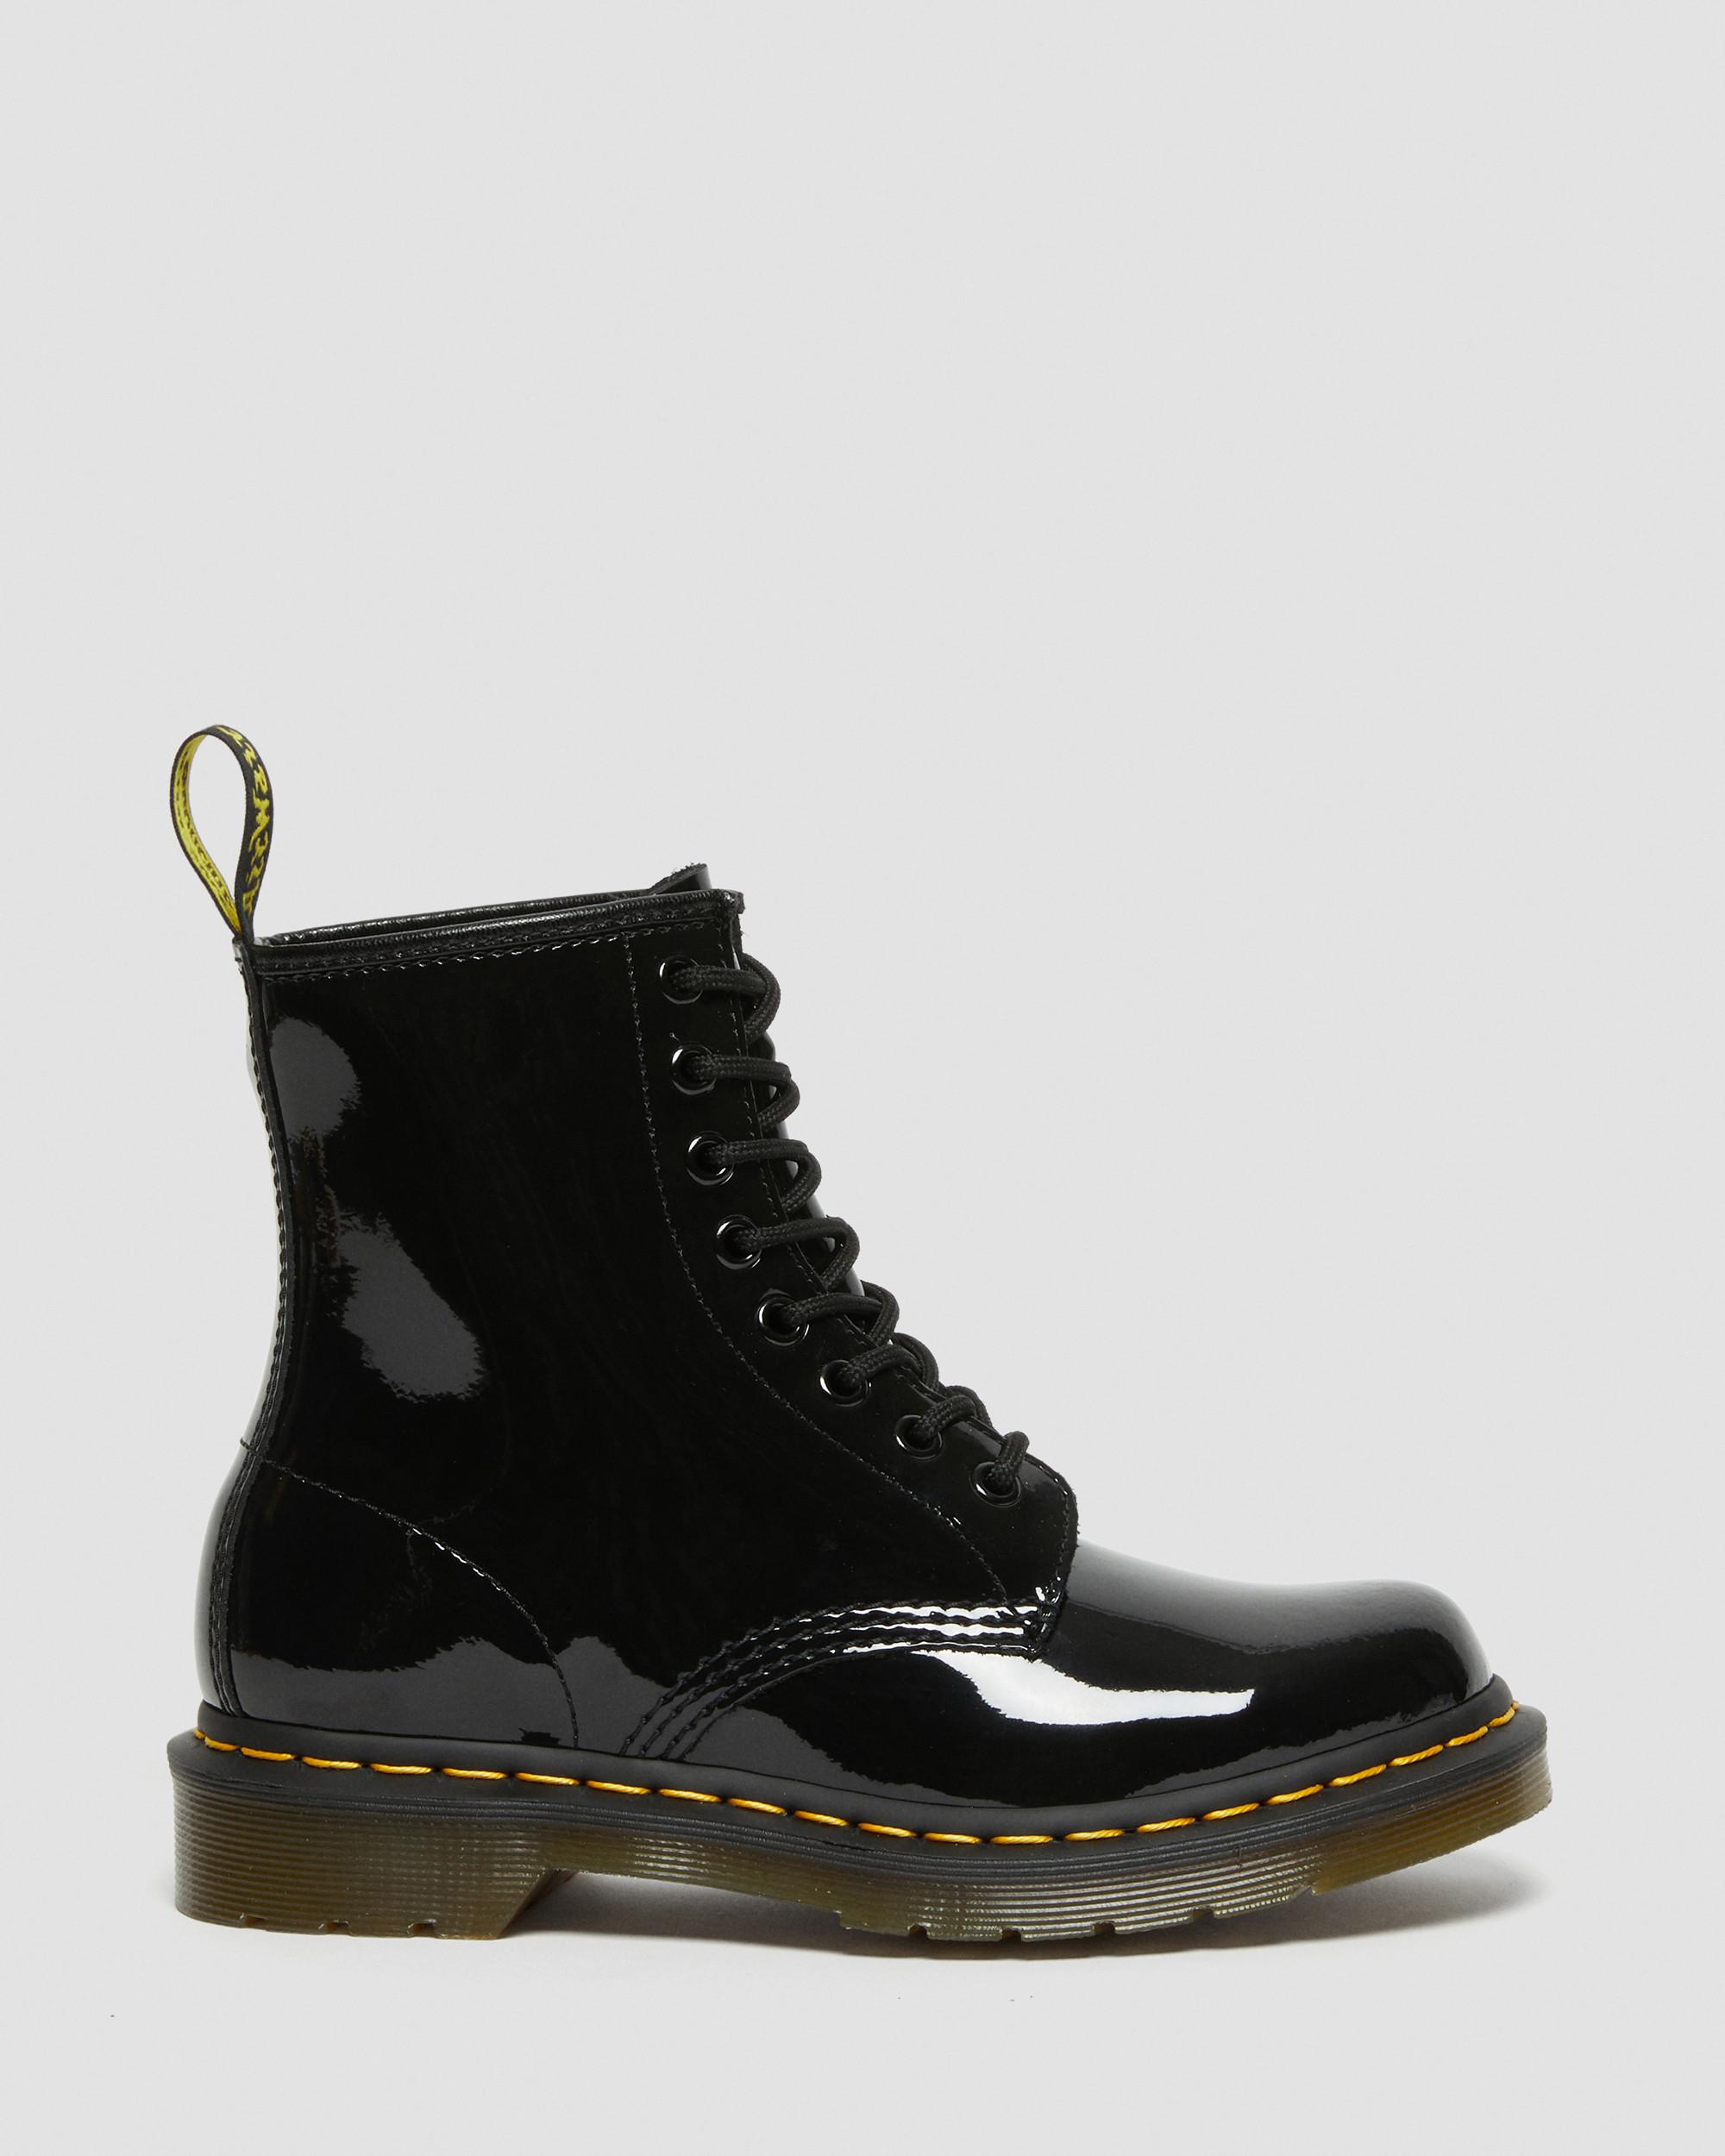 1460 Women's Patent Leather Lace Up Boots in Black